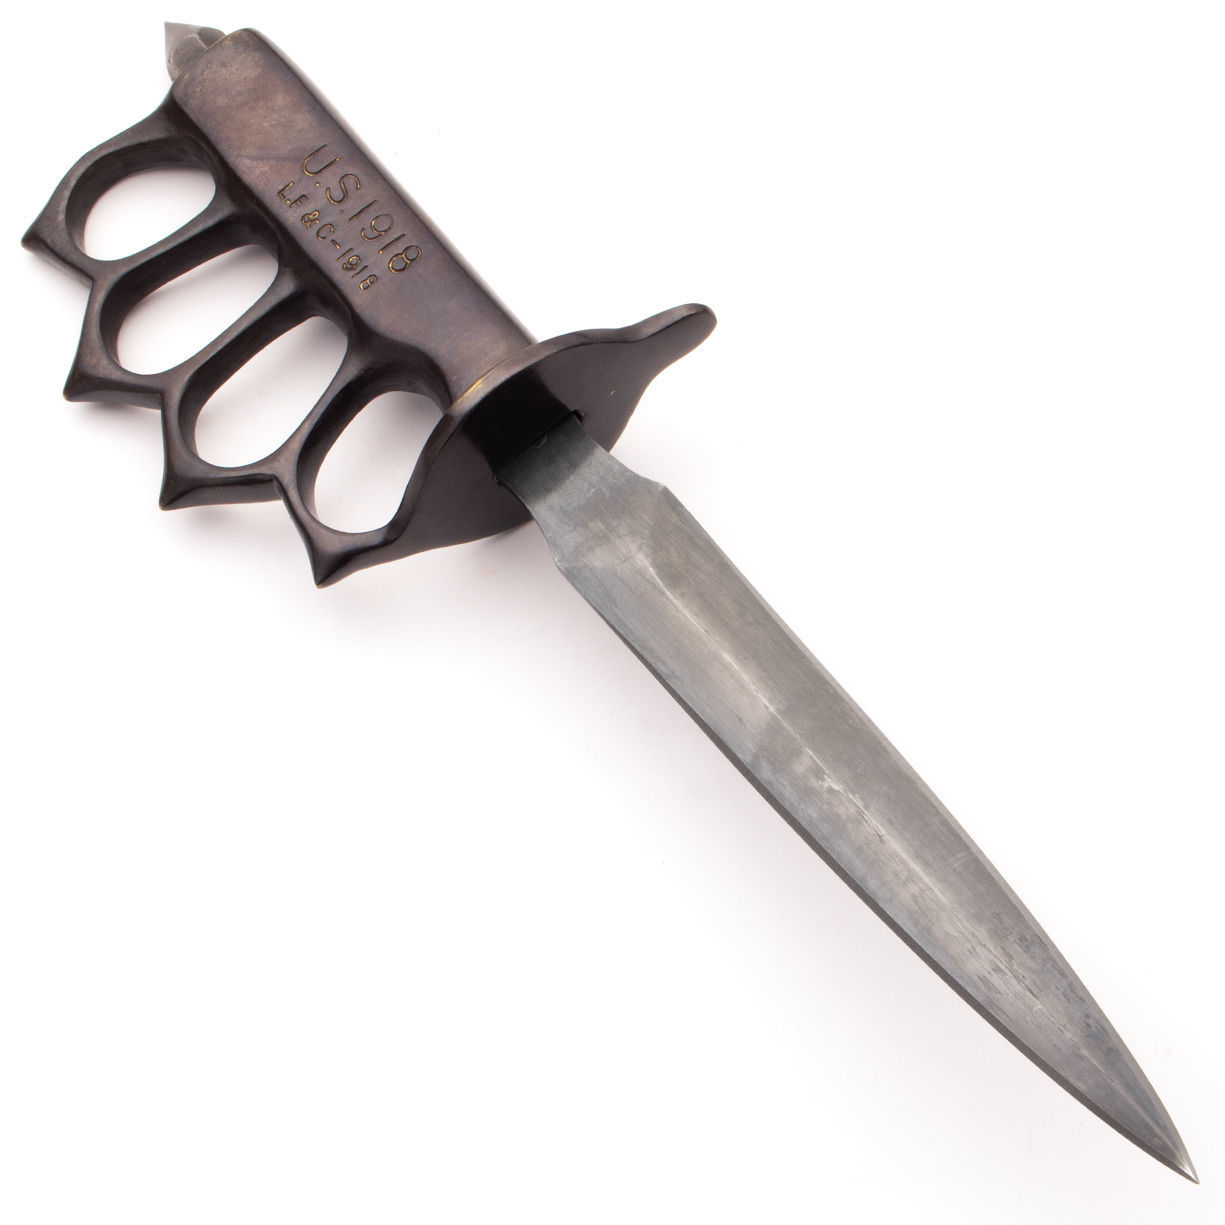 Replica 1918 US Knuckle Duster Trench Knife with blued, carbon steel blade, knuckle duster grip, skull crusher pommel